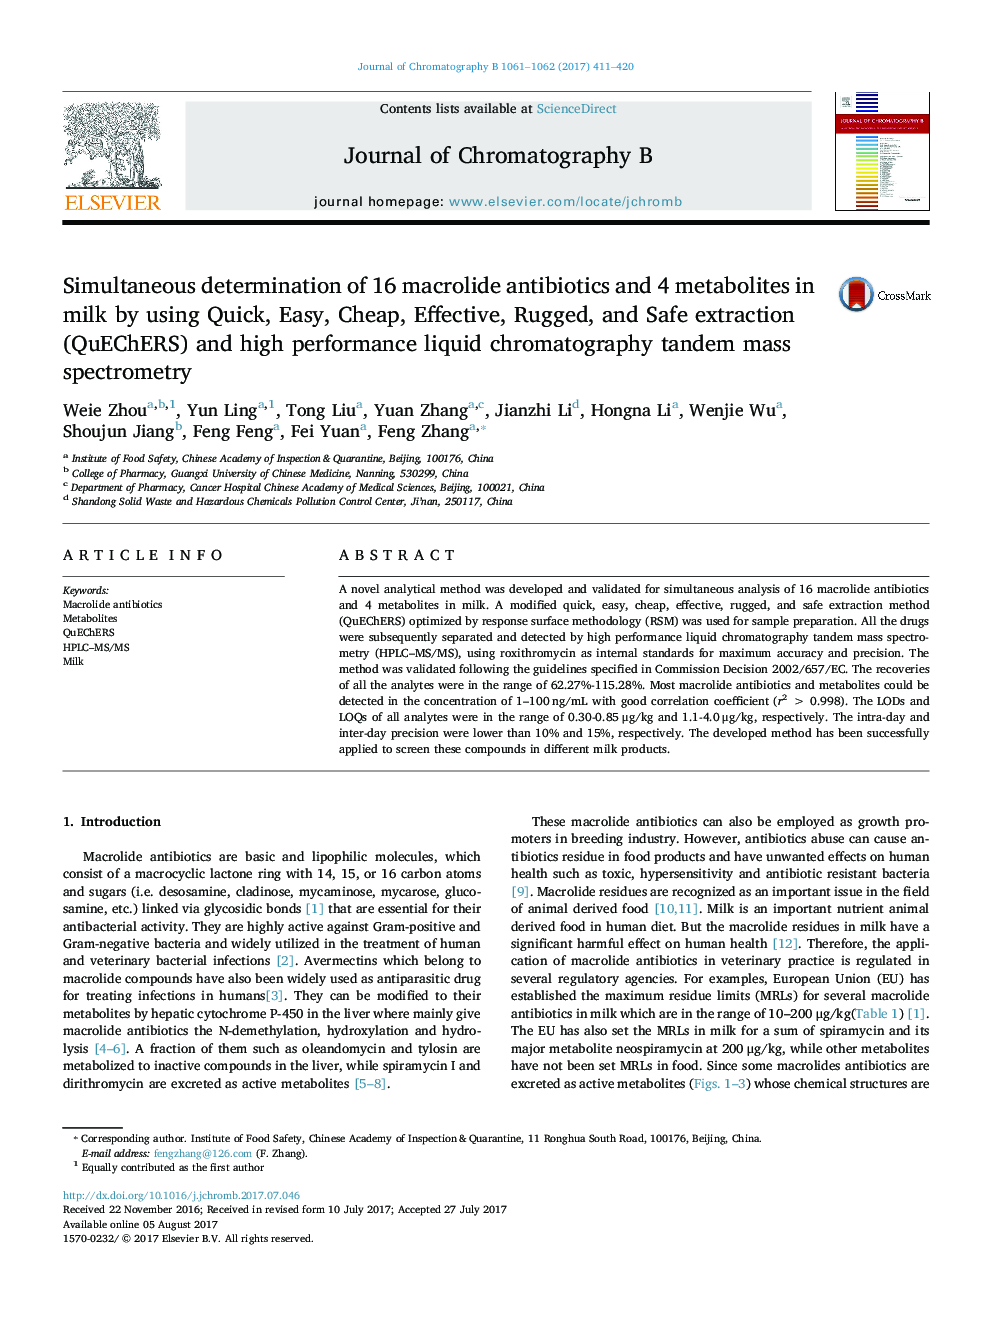 Simultaneous determination of 16 macrolide antibiotics and 4 metabolites in milk by using Quick, Easy, Cheap, Effective, Rugged, and Safe extraction (QuEChERS) and high performance liquid chromatography tandem mass spectrometry